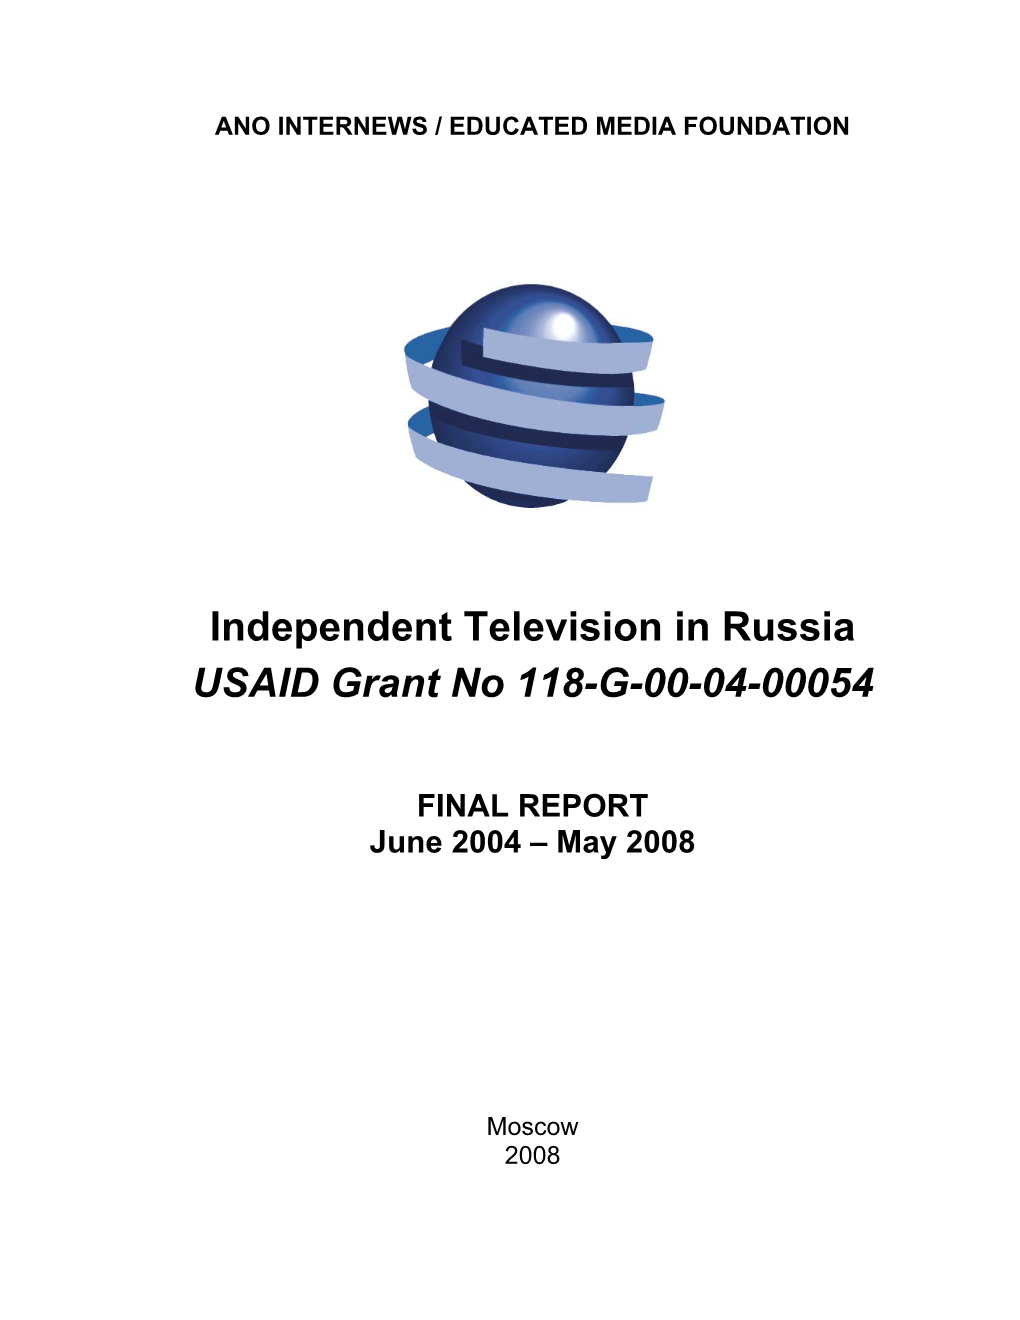 Independent Television in Russia USAID Grant Nо 118-G-00-04-00054